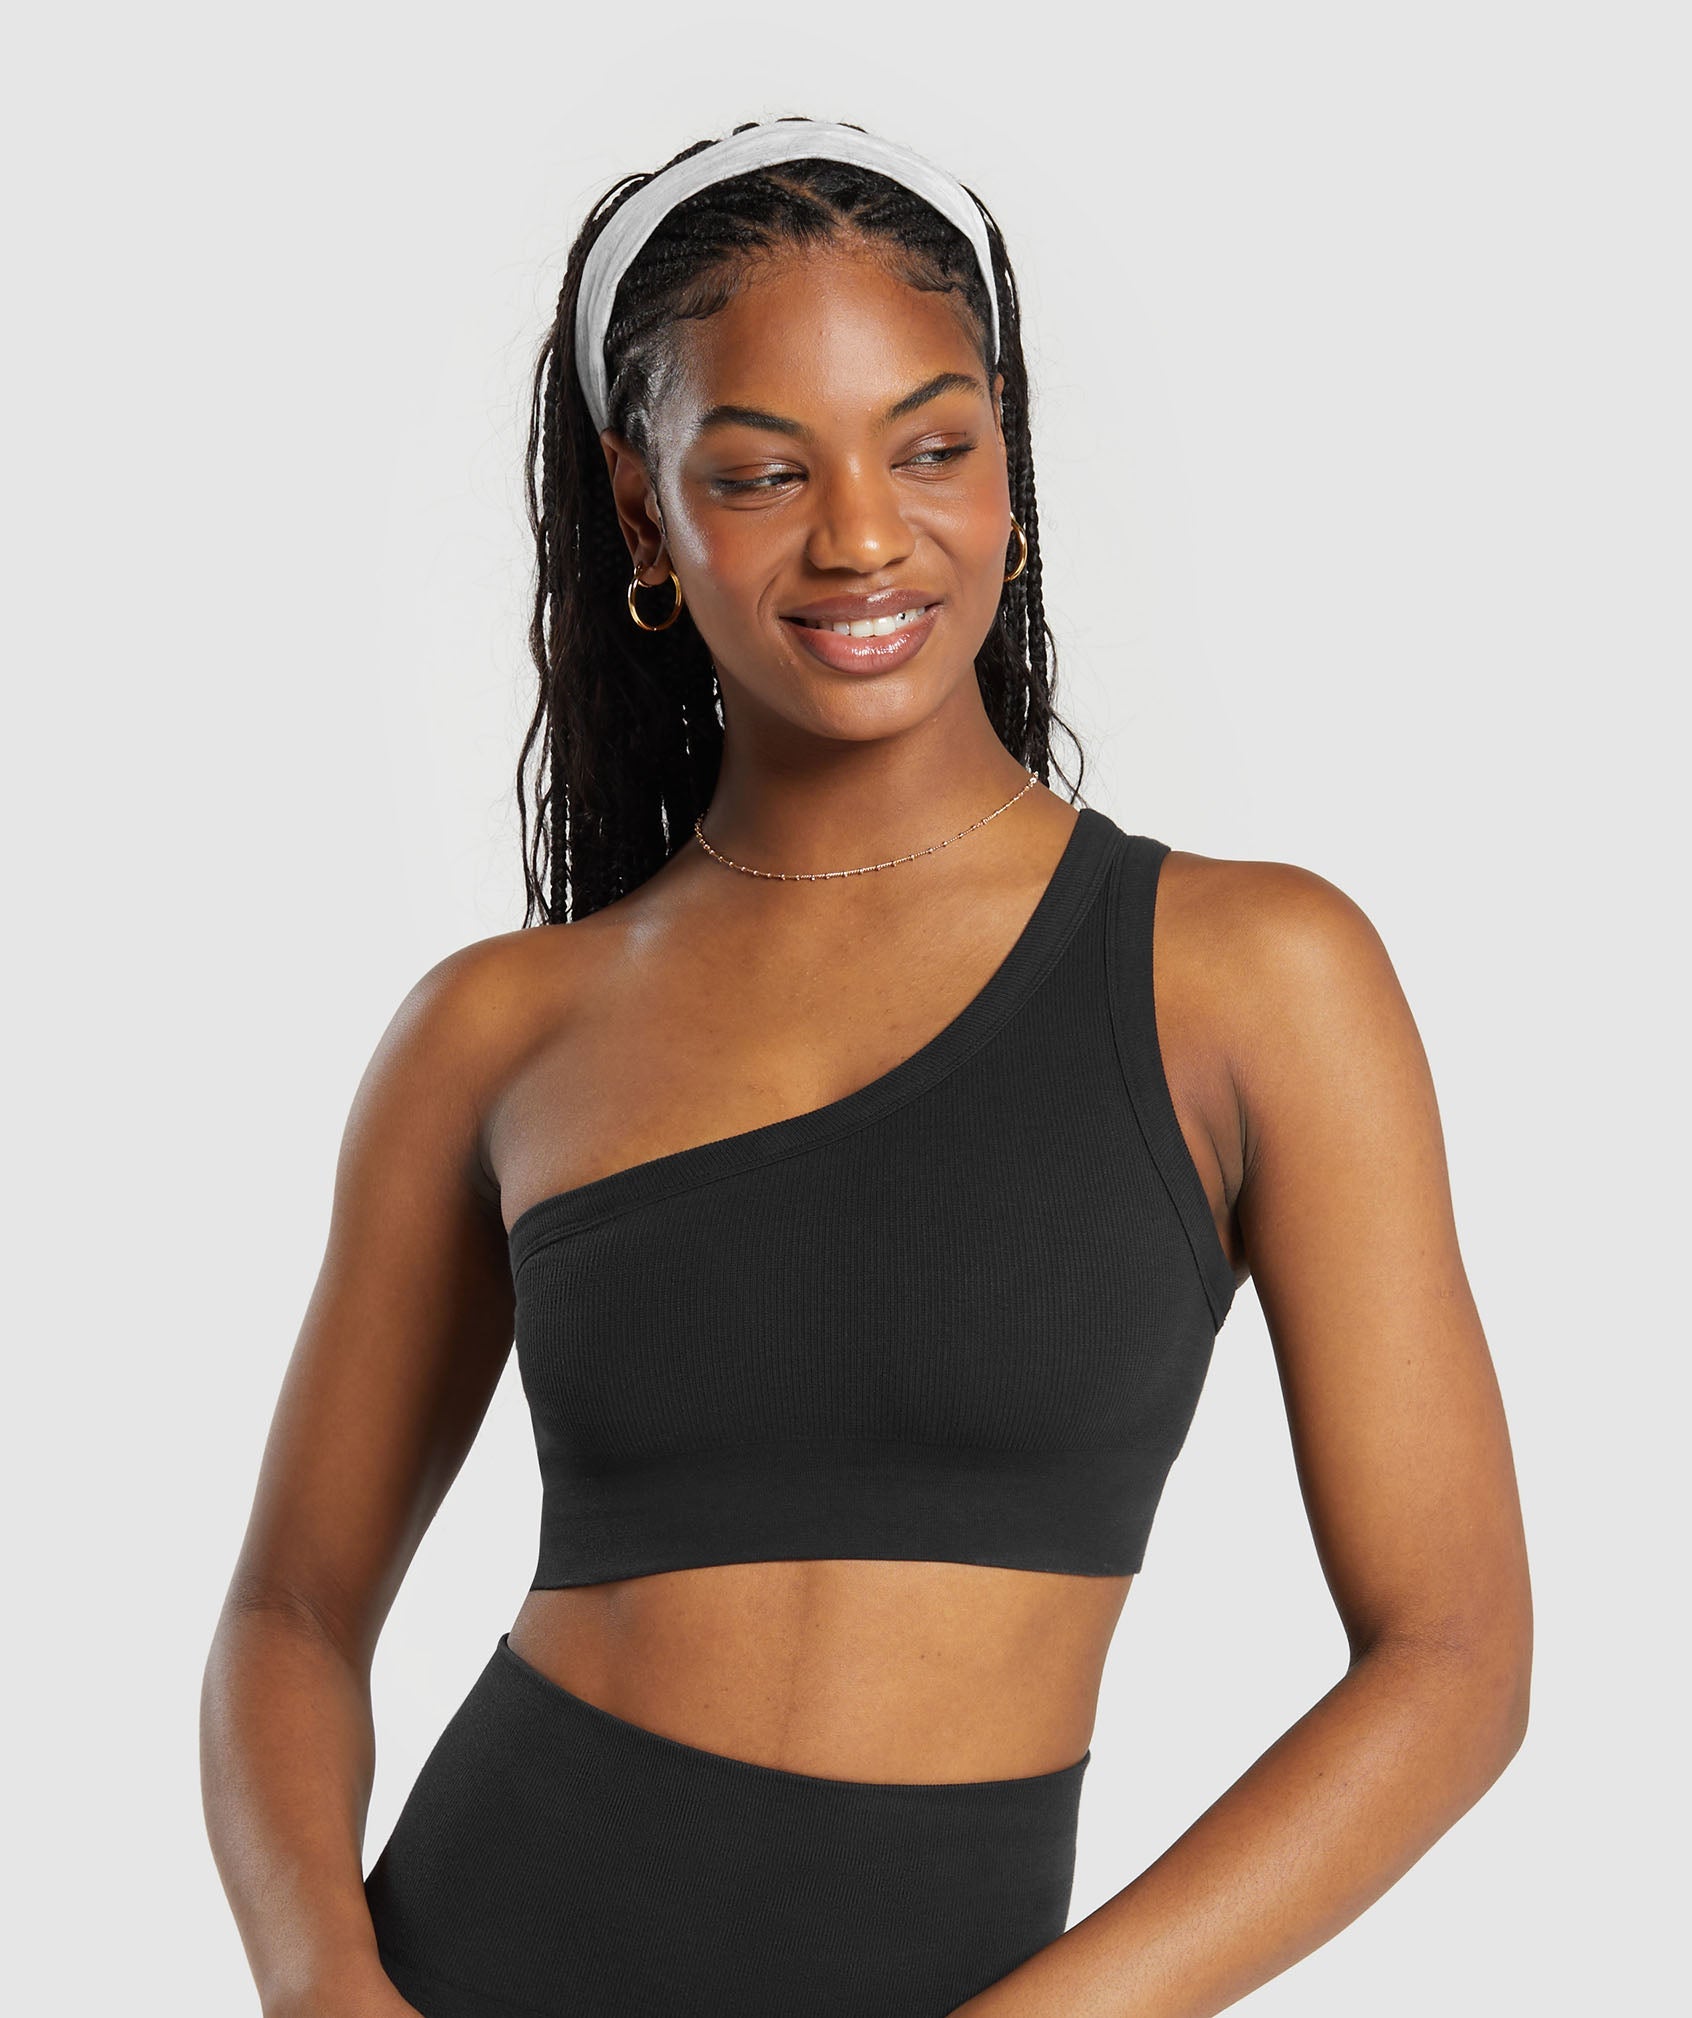 New Gymshark Releases  Latest Designs in Activewear